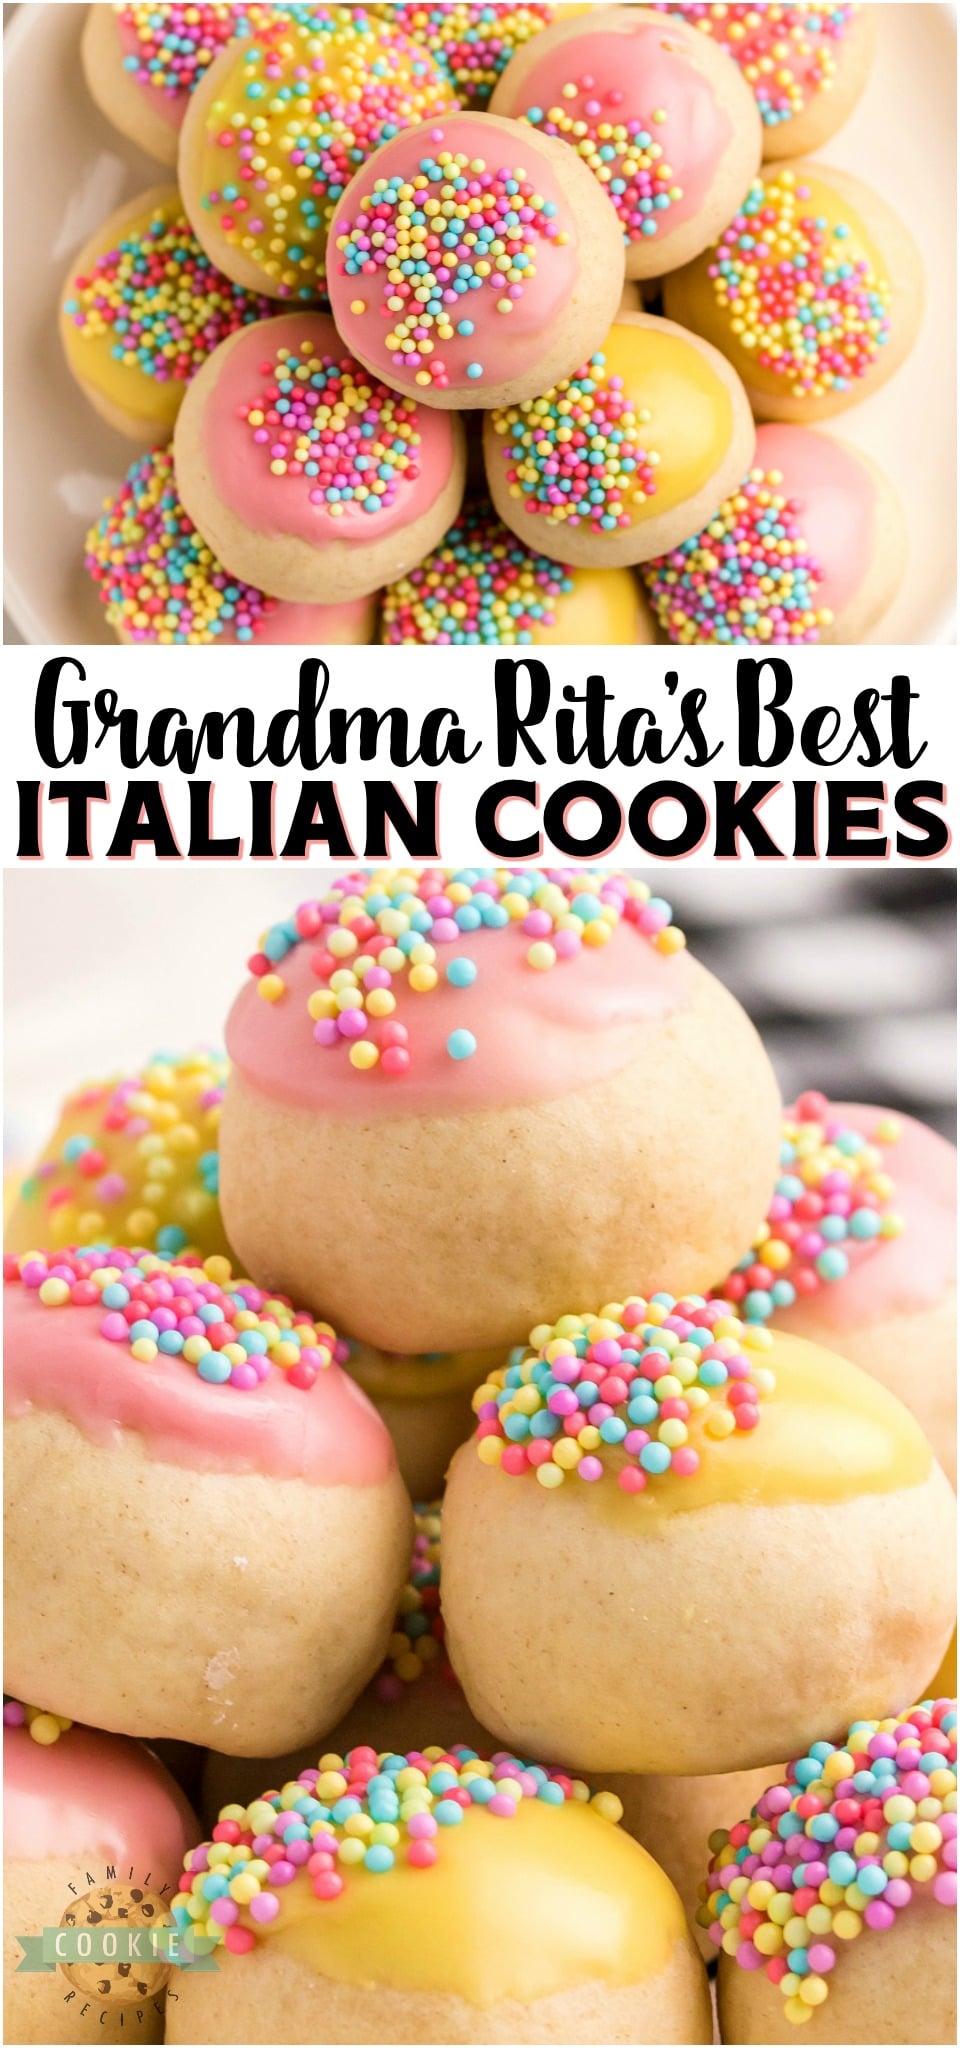 Lovely Italian Cookie recipe I got from my Grandmother! Tender dough rolled into balls, baked & topped with a sweet glaze and colorful sprinkles perfect for any occasion! #Italian #baking #Frosted #Cookies #dessert #cookie #from FAMILY COOKIE RECIPES via @buttergirls